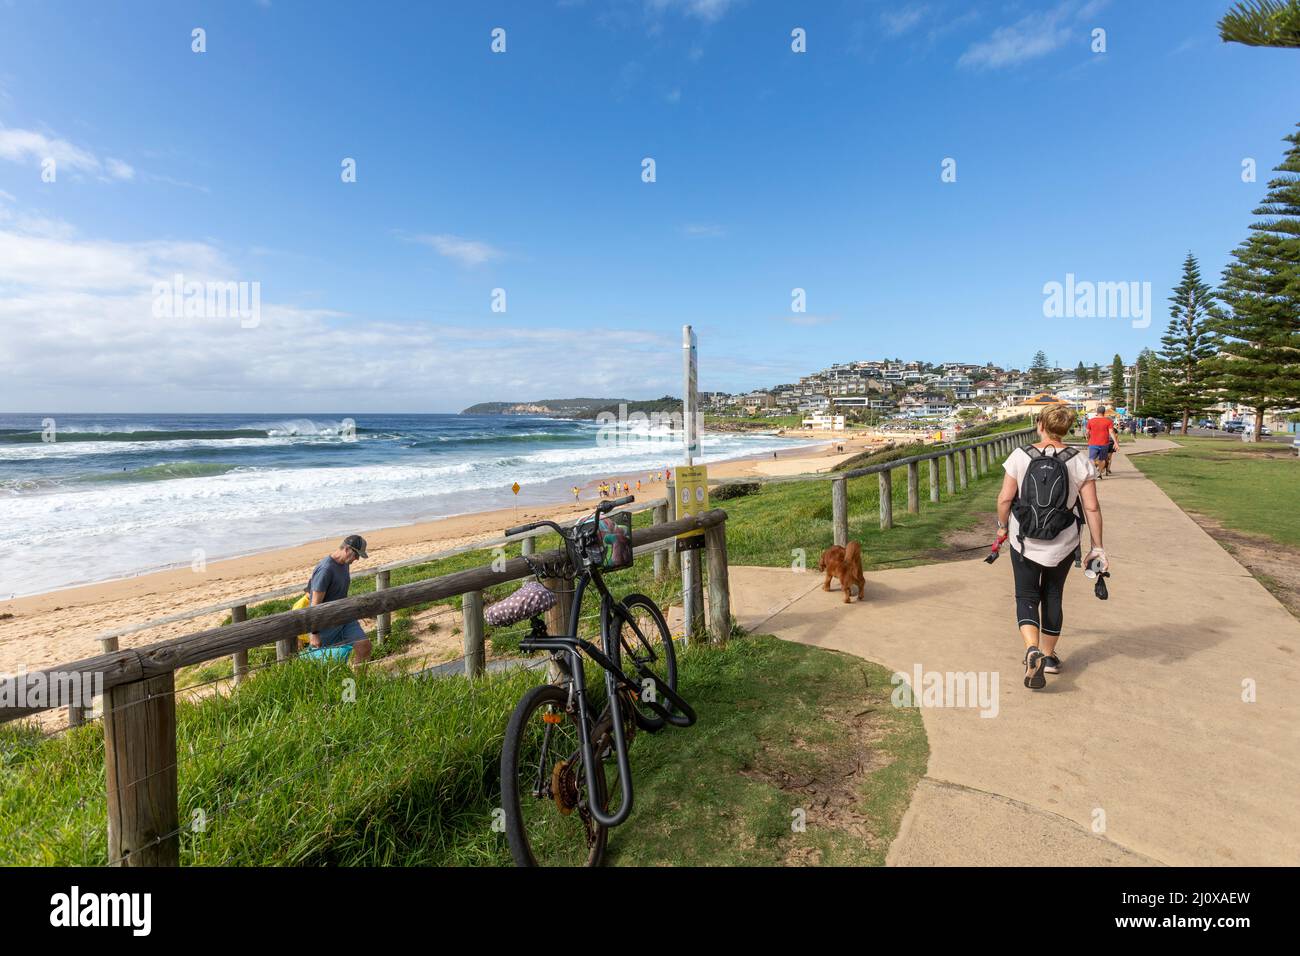 Part of the Dee Why to Manly coastal walking route along the east coast of Sydney,NSW,Australia on an autumn day, lady walking dog at curl curl beach Stock Photo